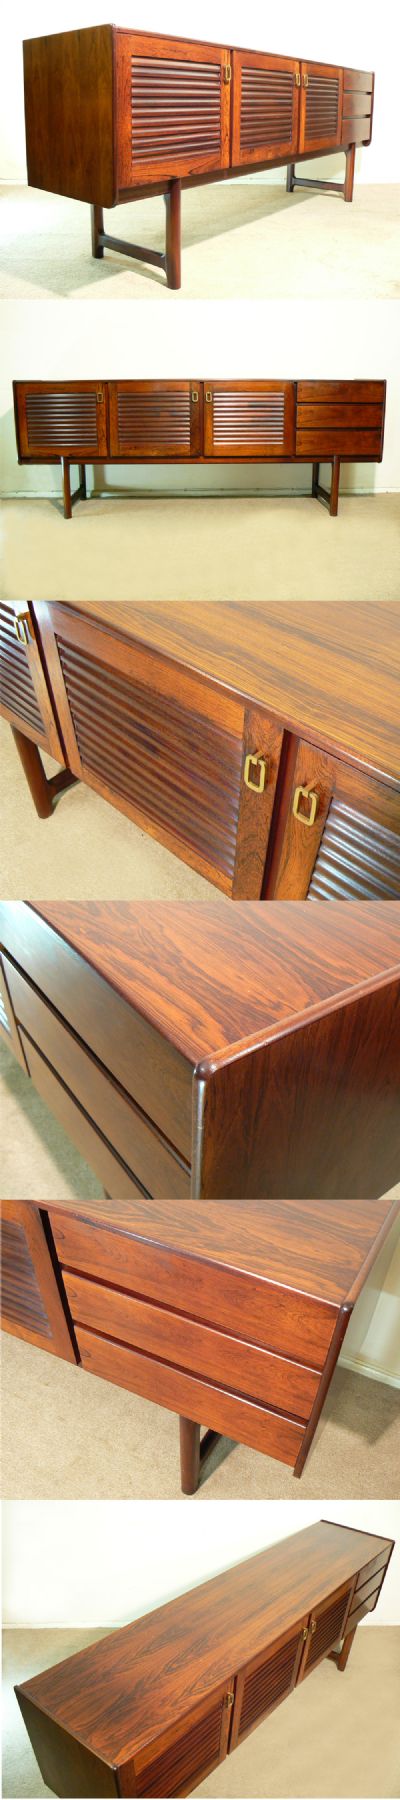 A large rosewood sideboard with a superb grain. Manufactured by Mcintosh of Scotland, c1970s.